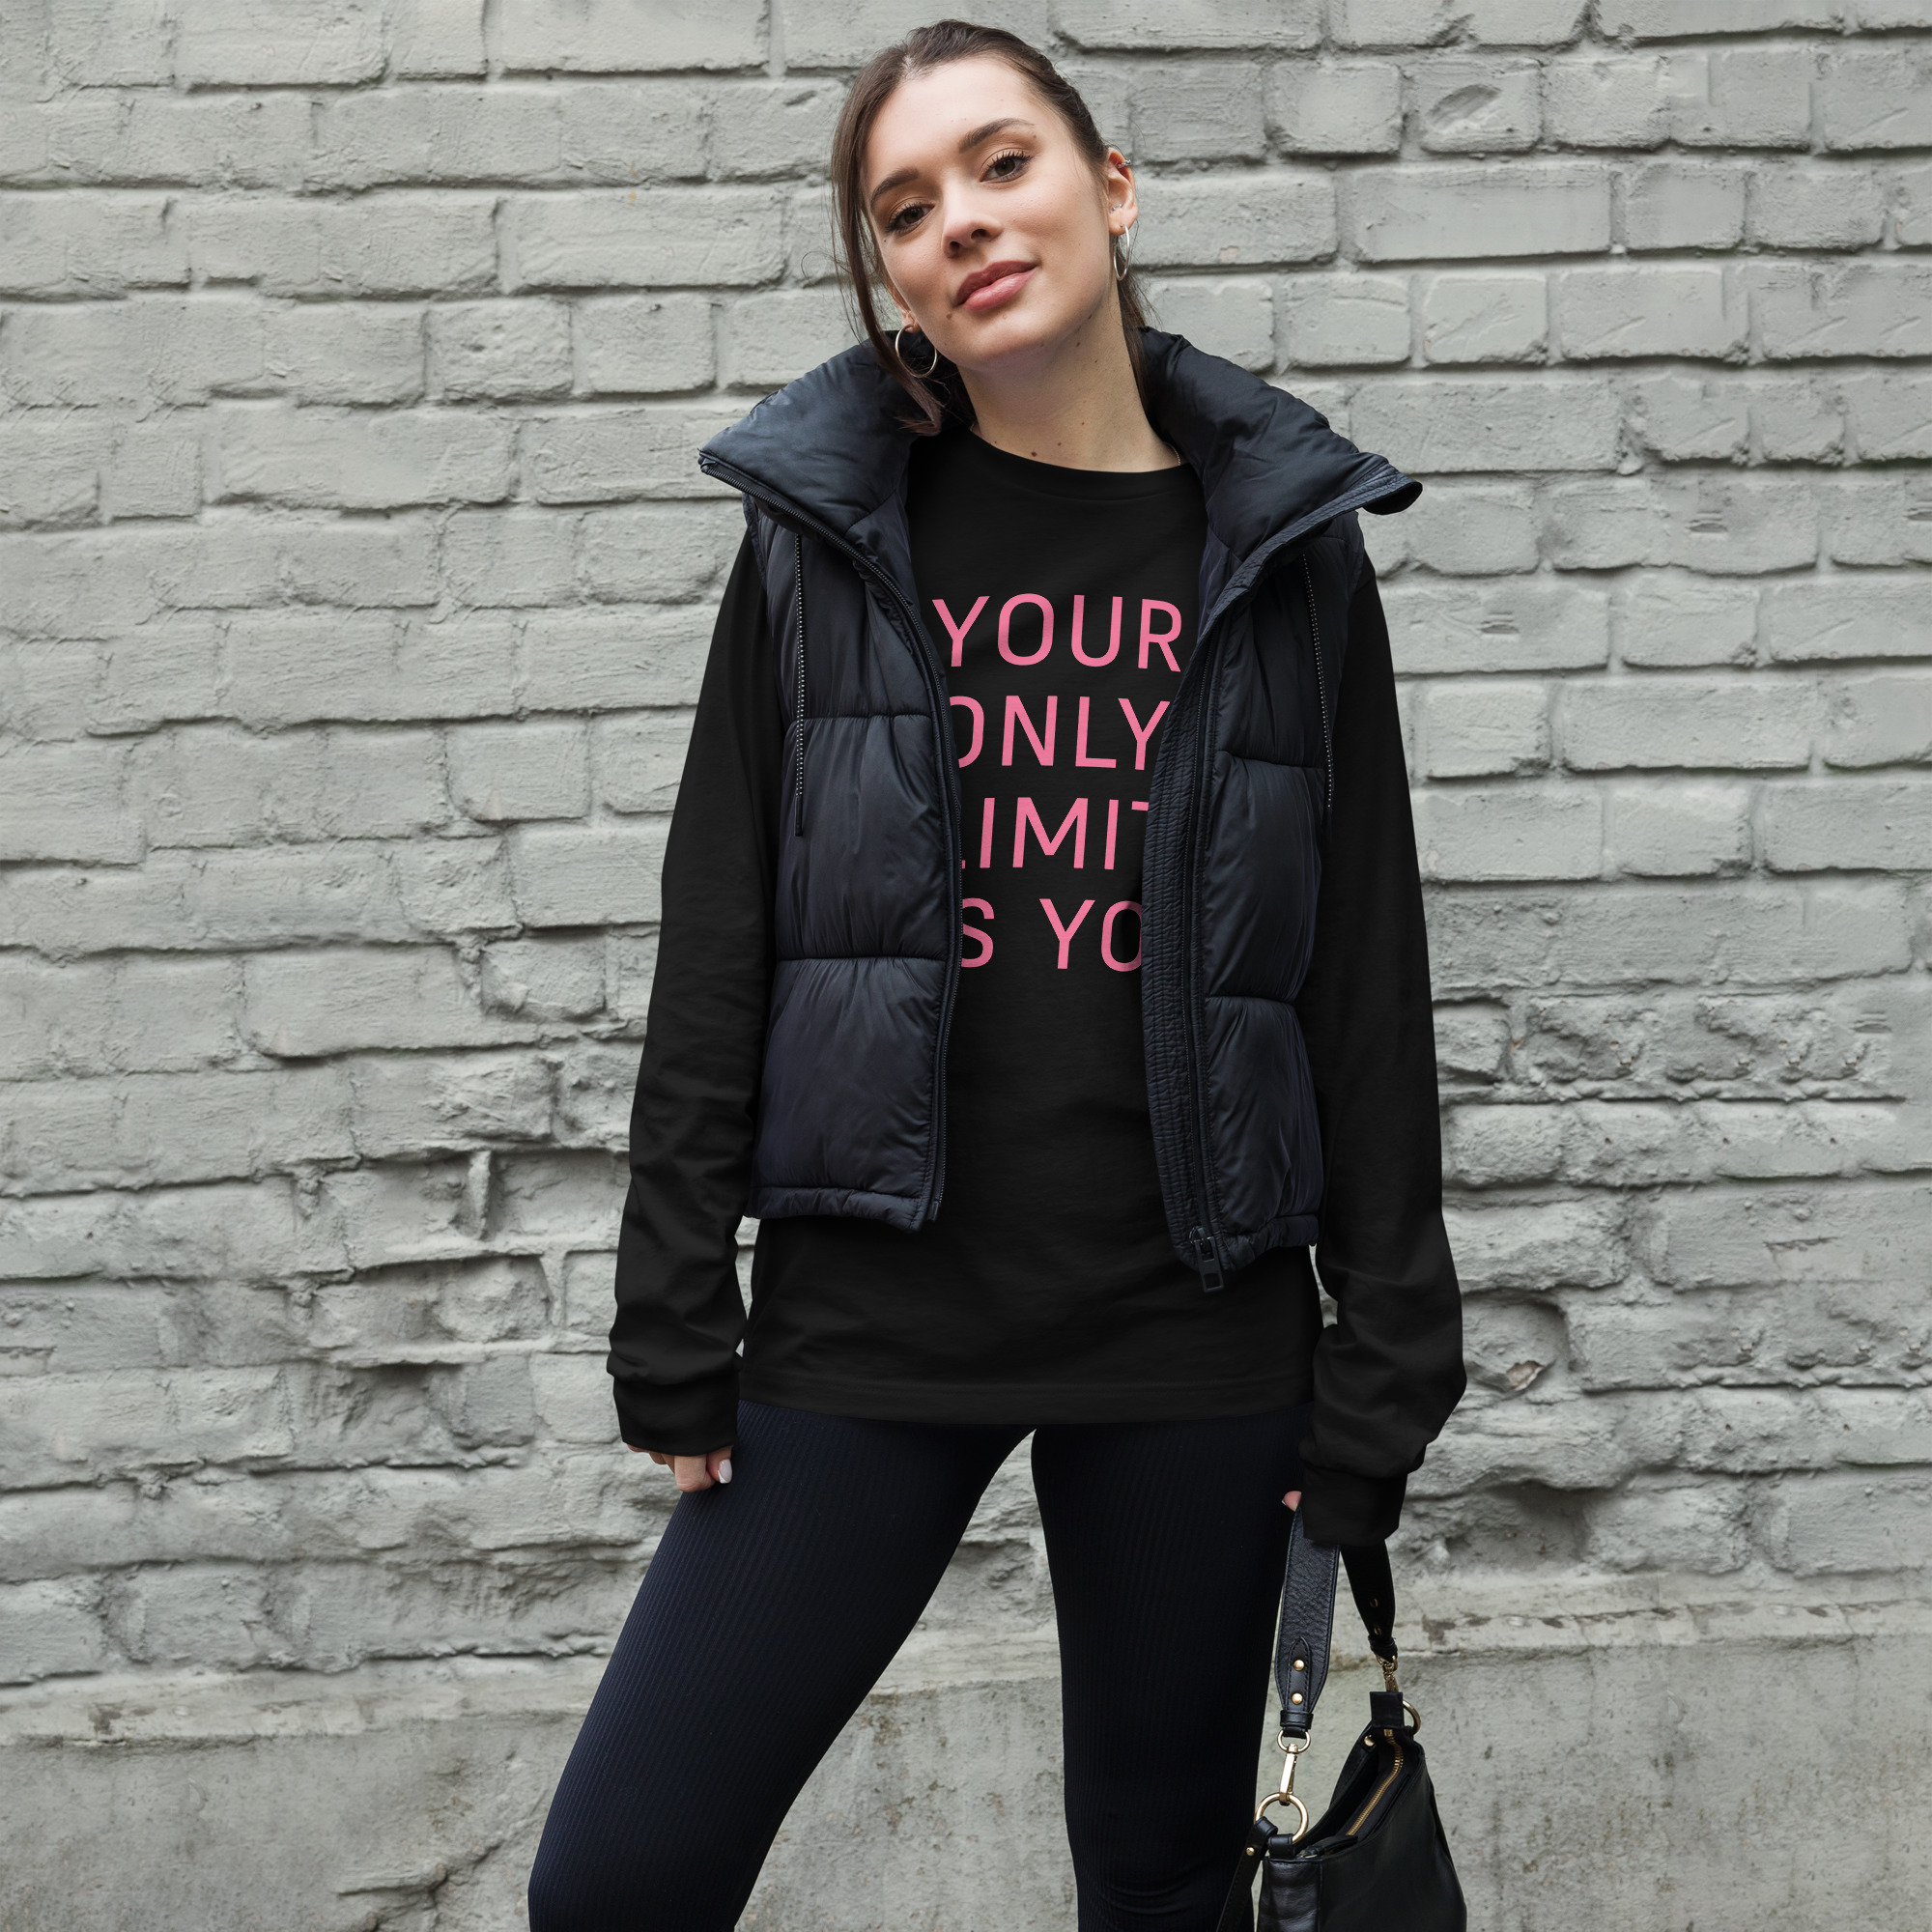 “Your only limit is you” – Langärmeliges Unisex-T-Shirt